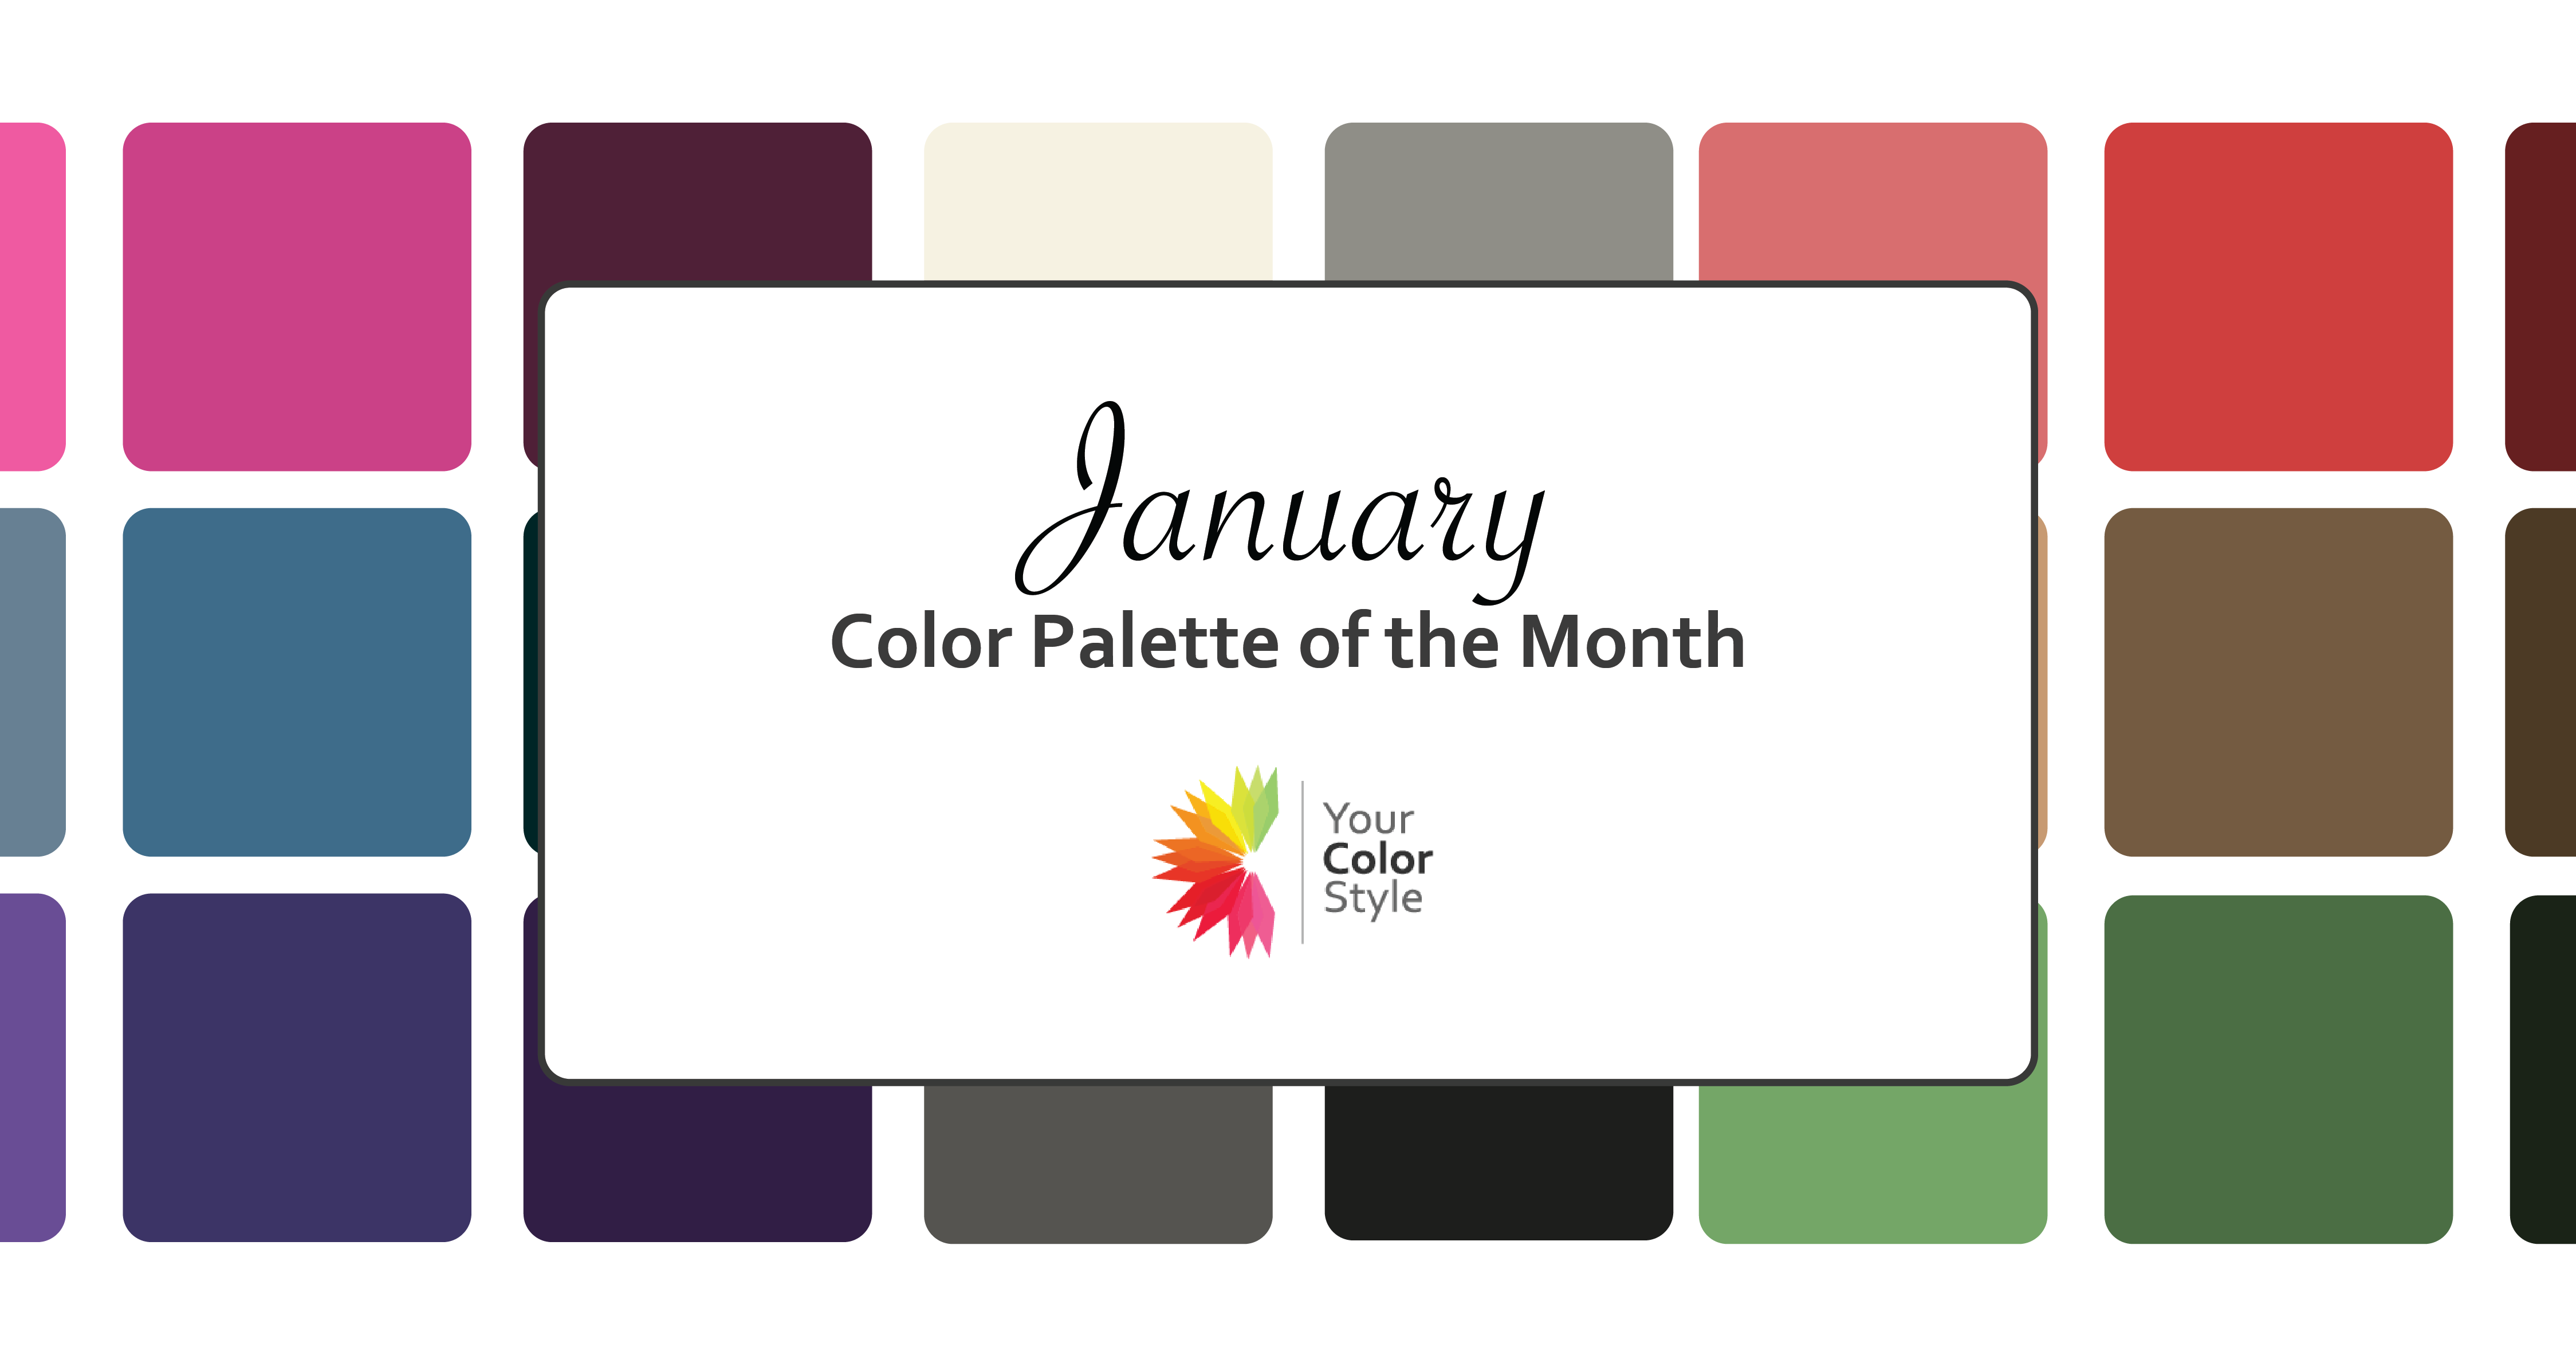 Color Palette of the Month: January